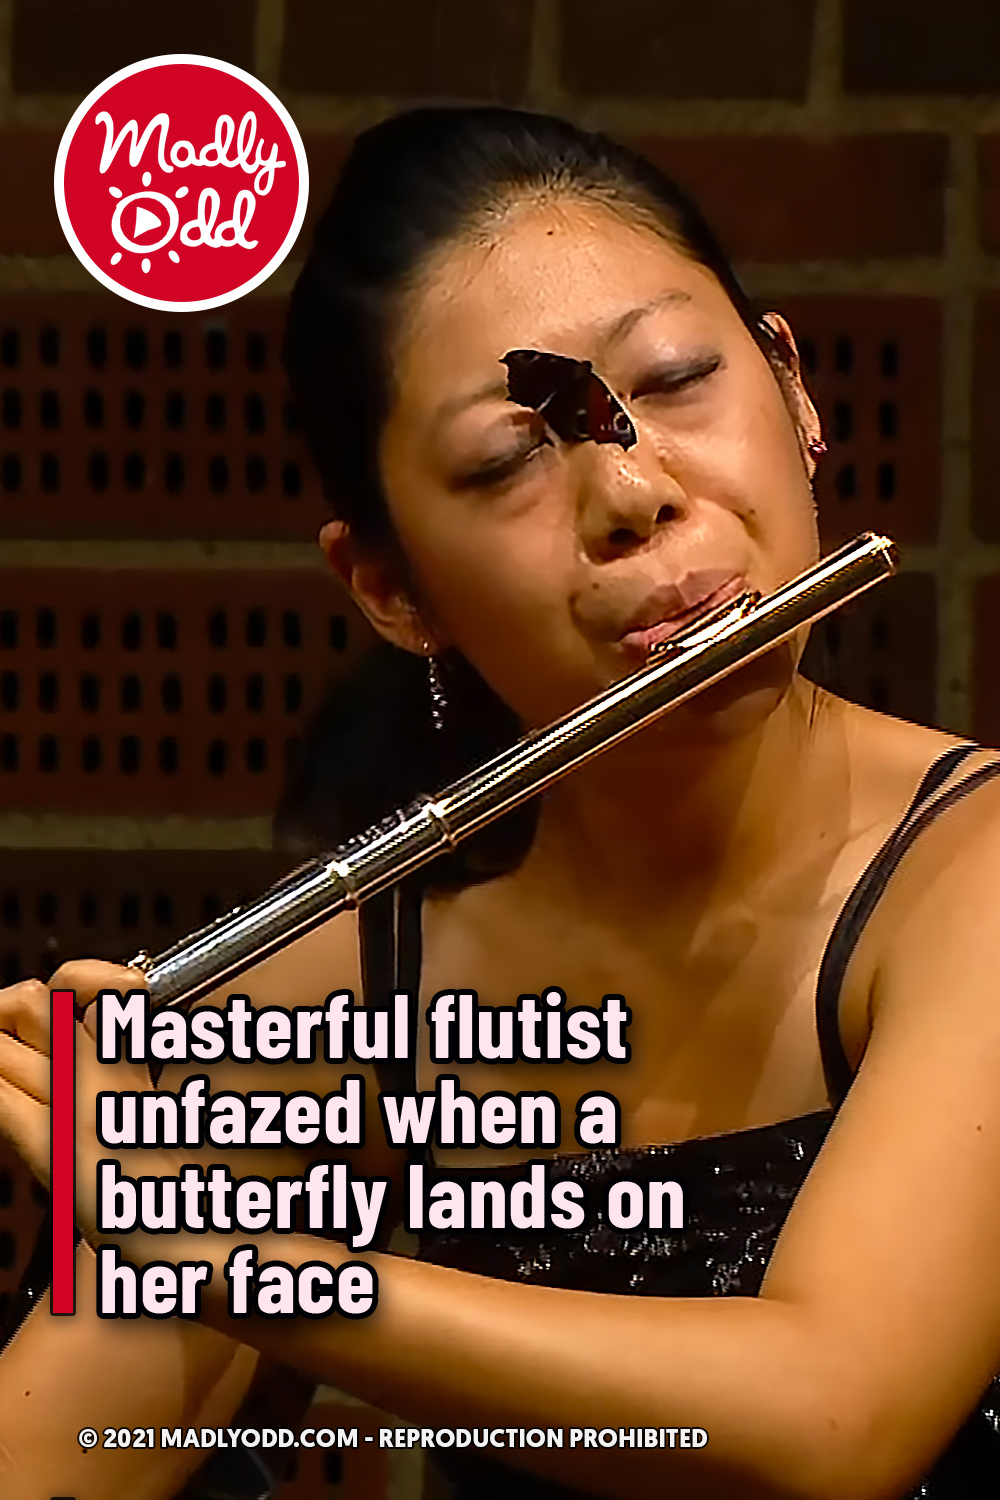 Masterful flutist unfazed when a butterfly lands on her face